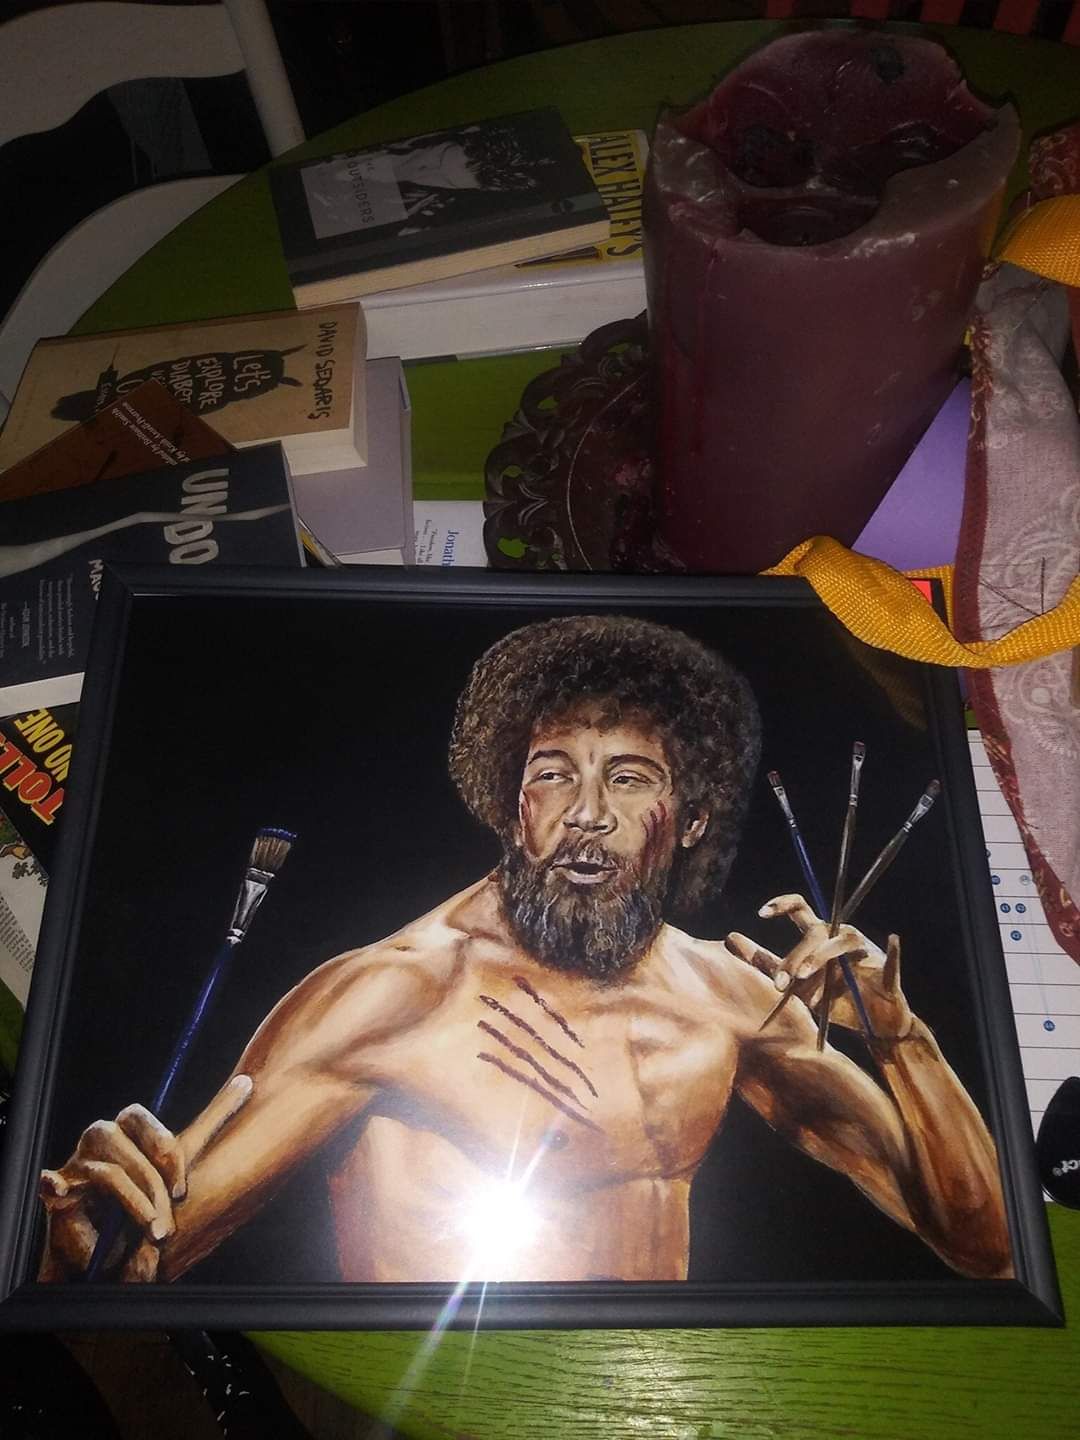 Someone painted Bob Ross like this.